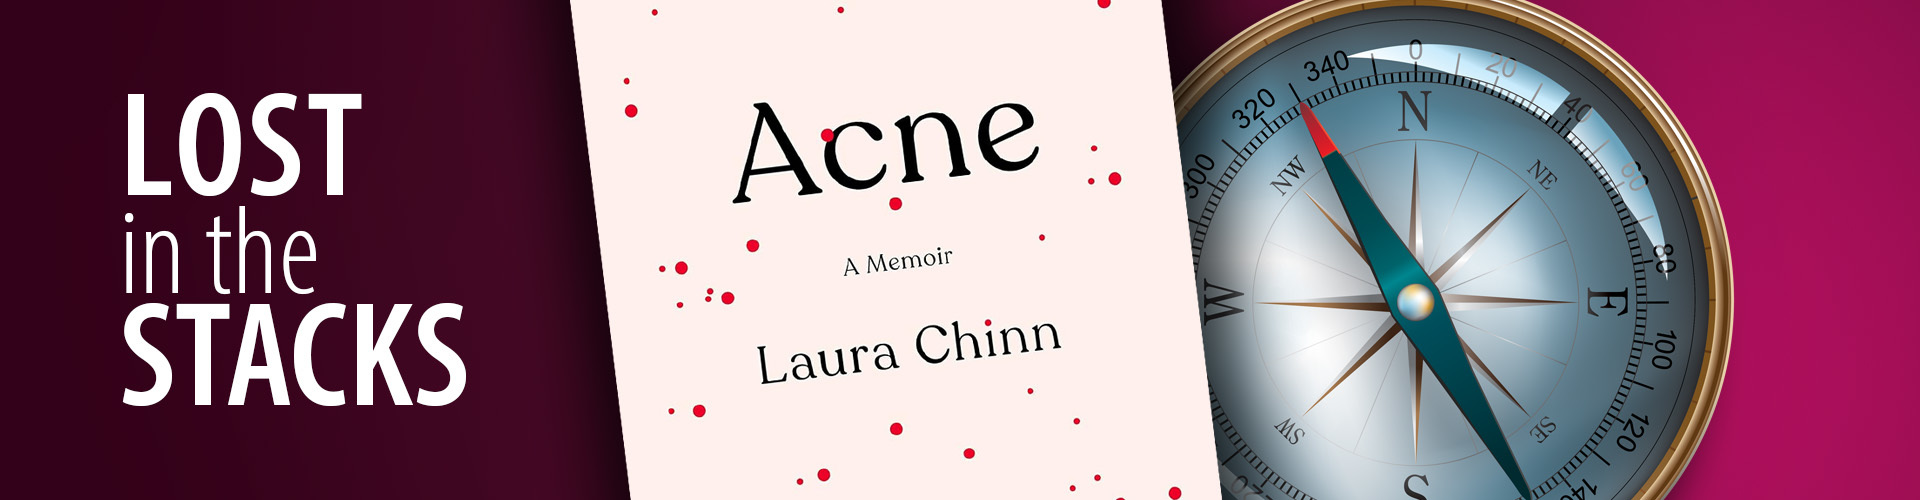 acne featured 1920x500